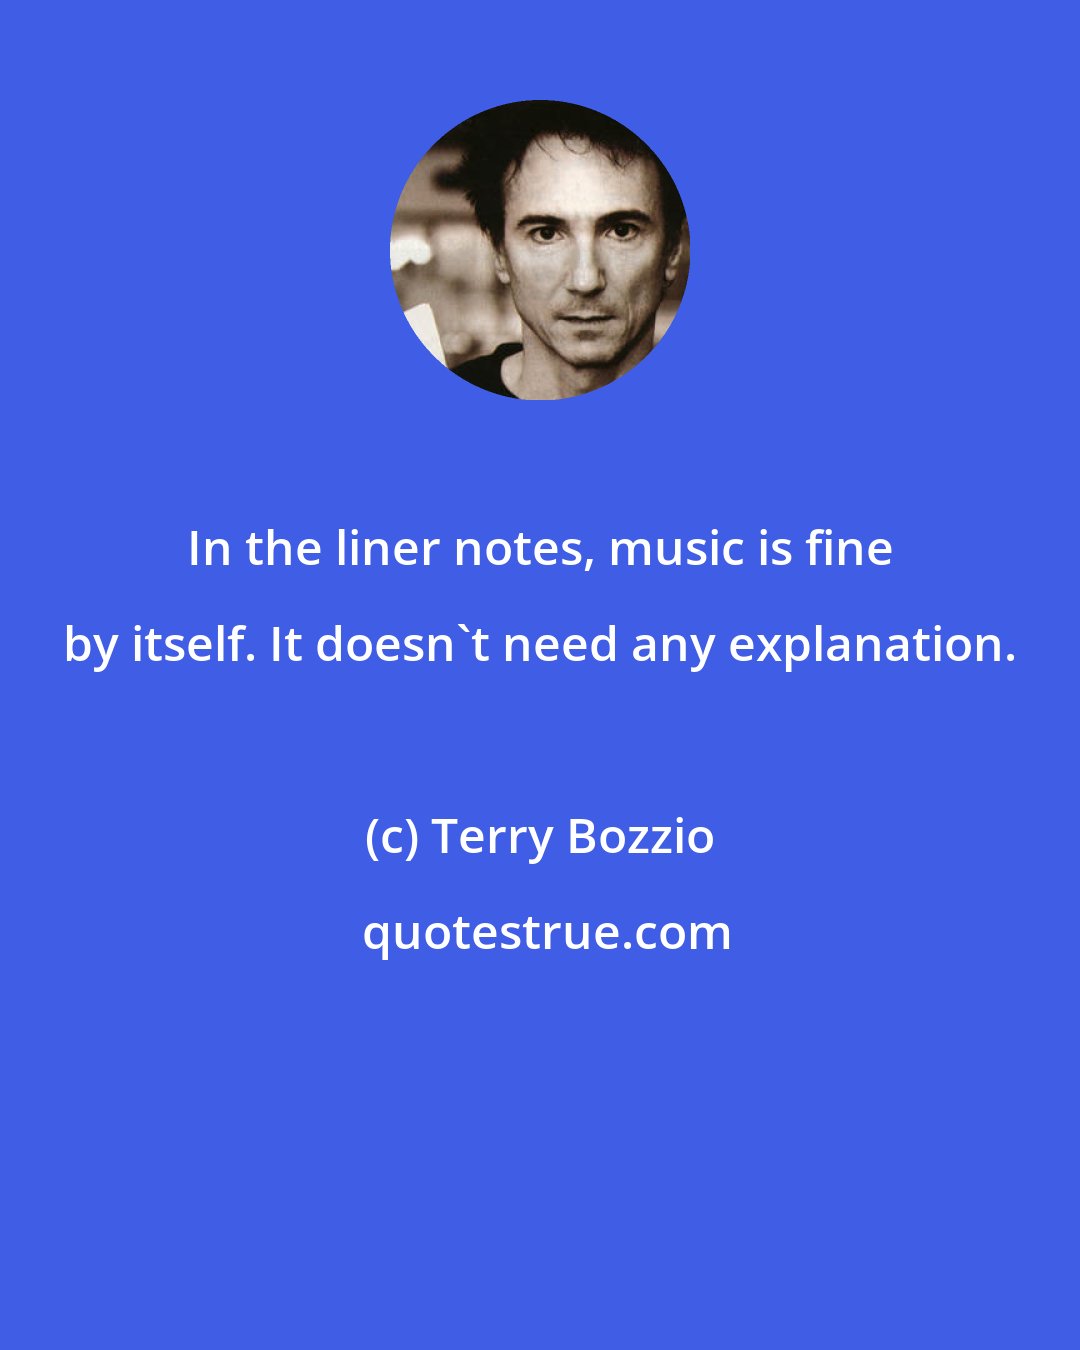 Terry Bozzio: In the liner notes, music is fine by itself. It doesn't need any explanation.